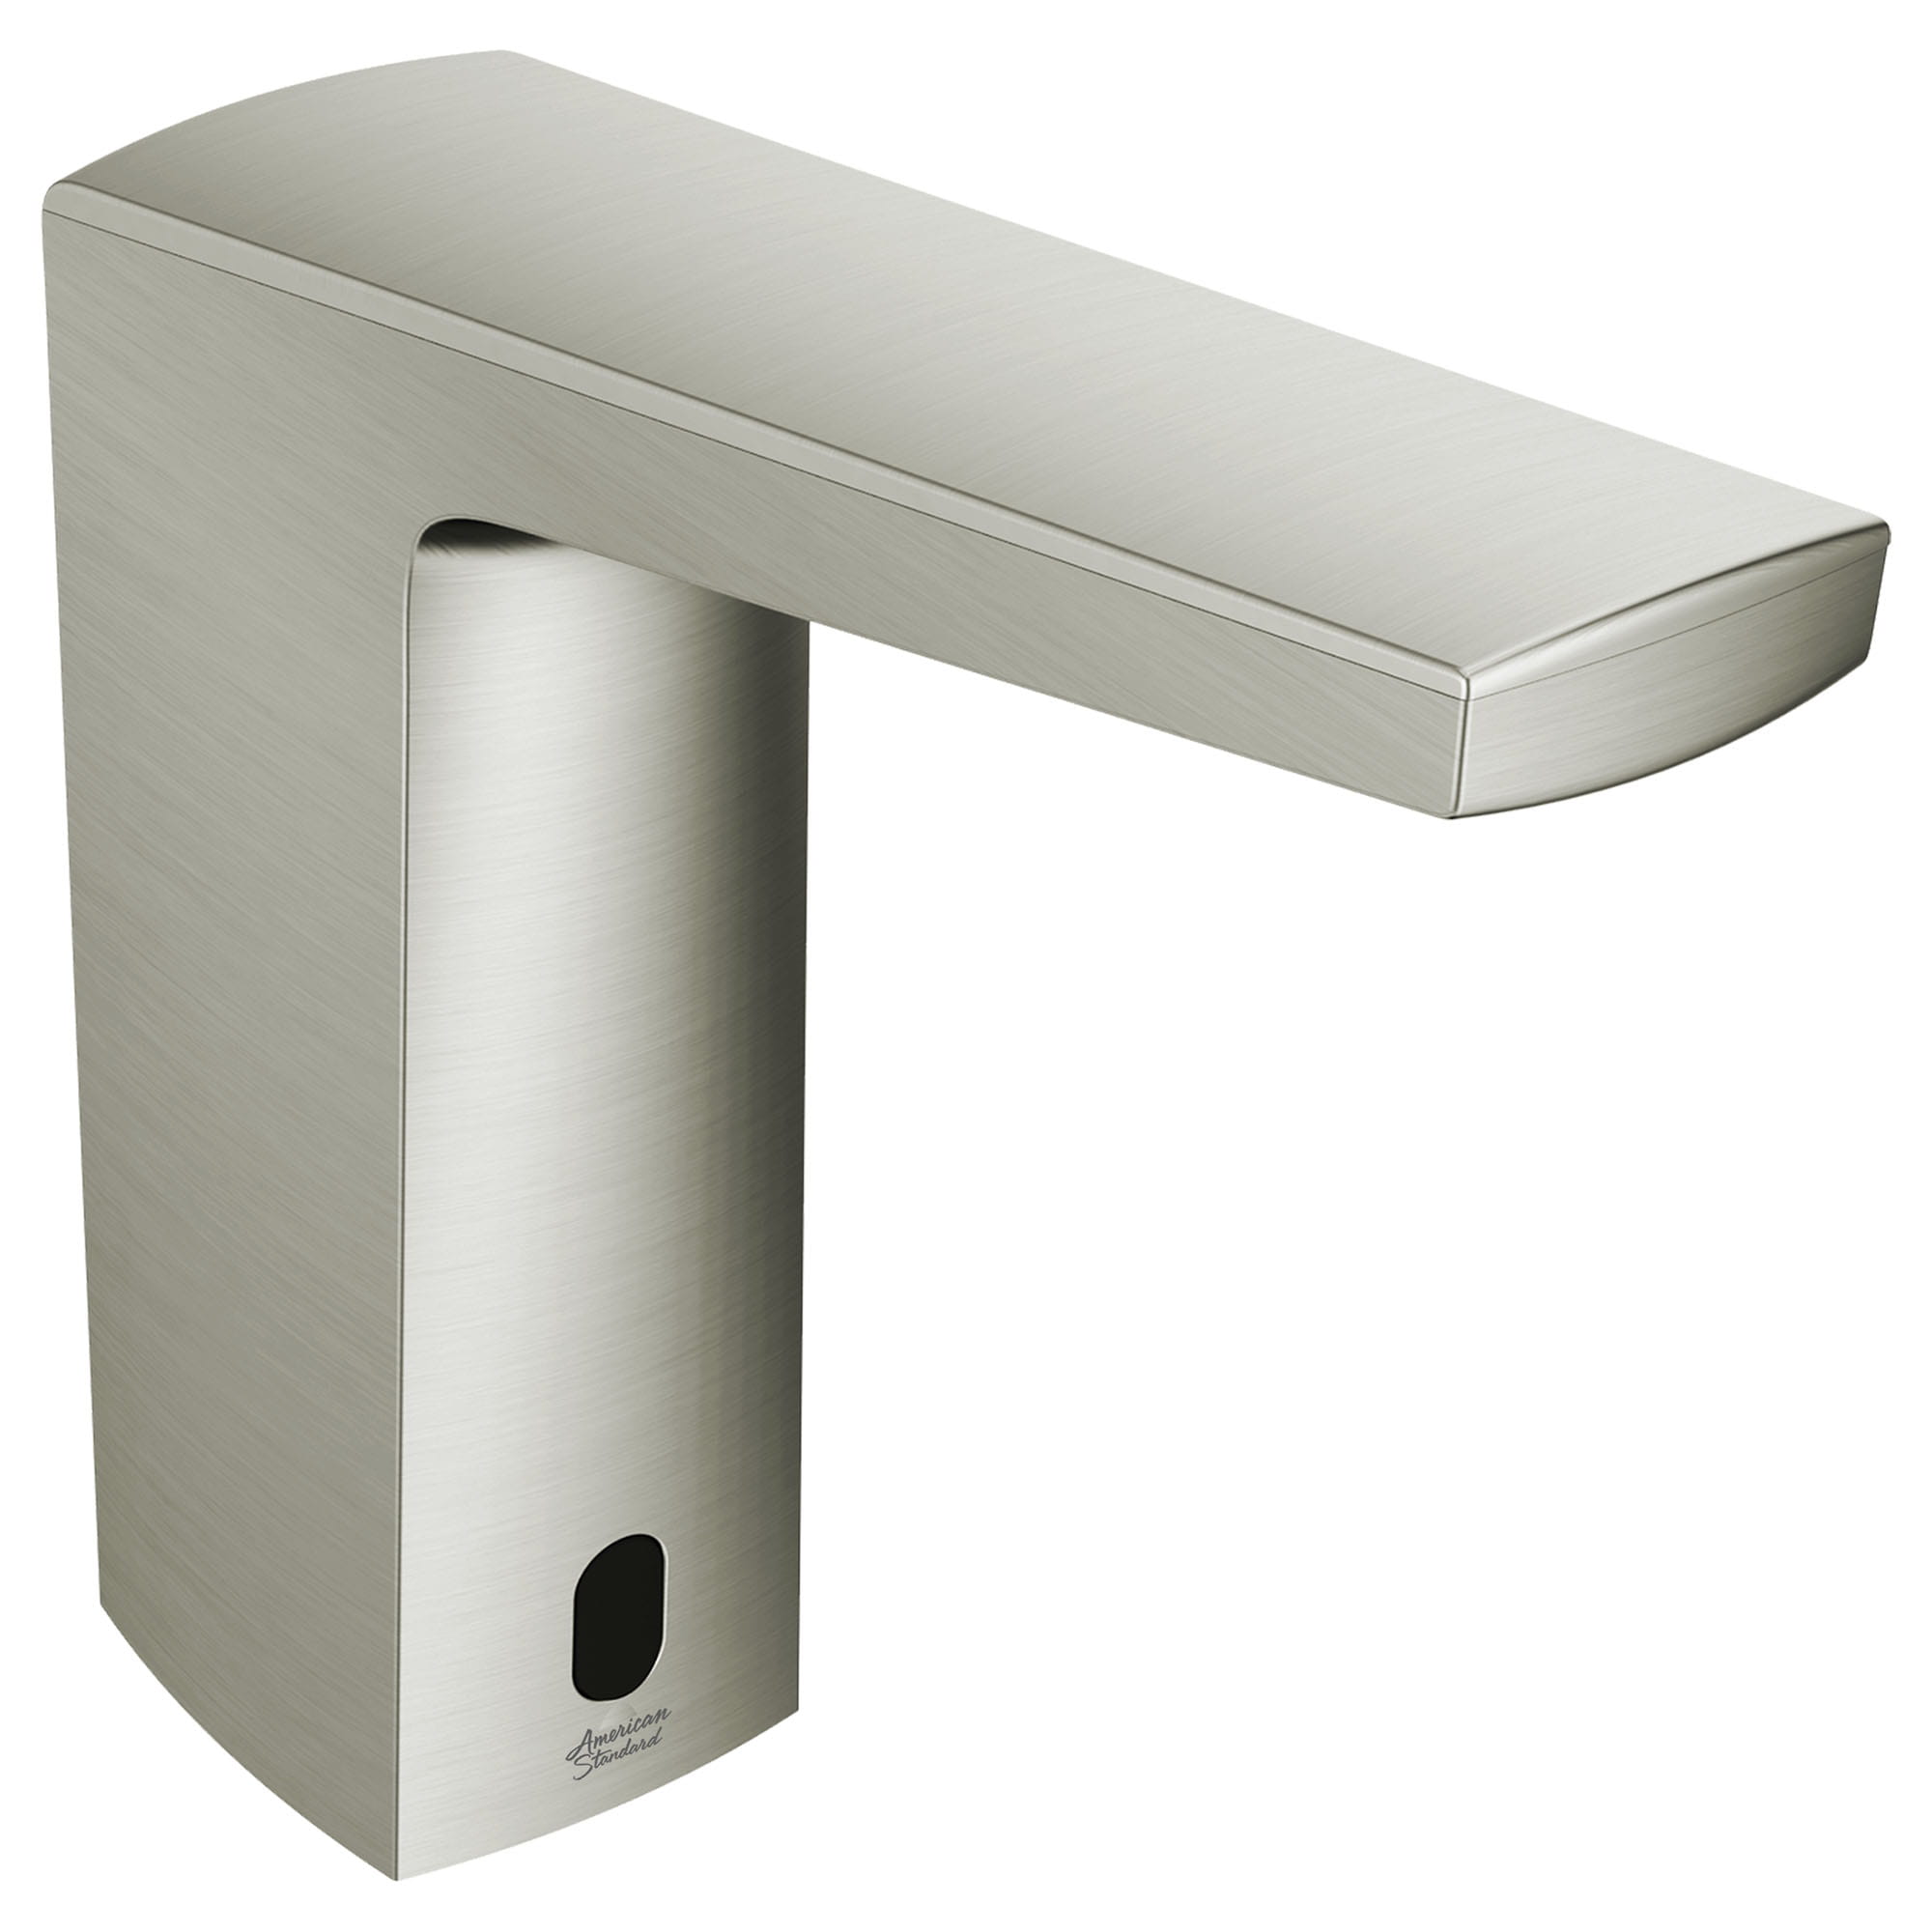 Paradigm Selectronic Touchless Faucet Battery Powered 035 gpm 13 Lpm   BRUSHED NICKEL